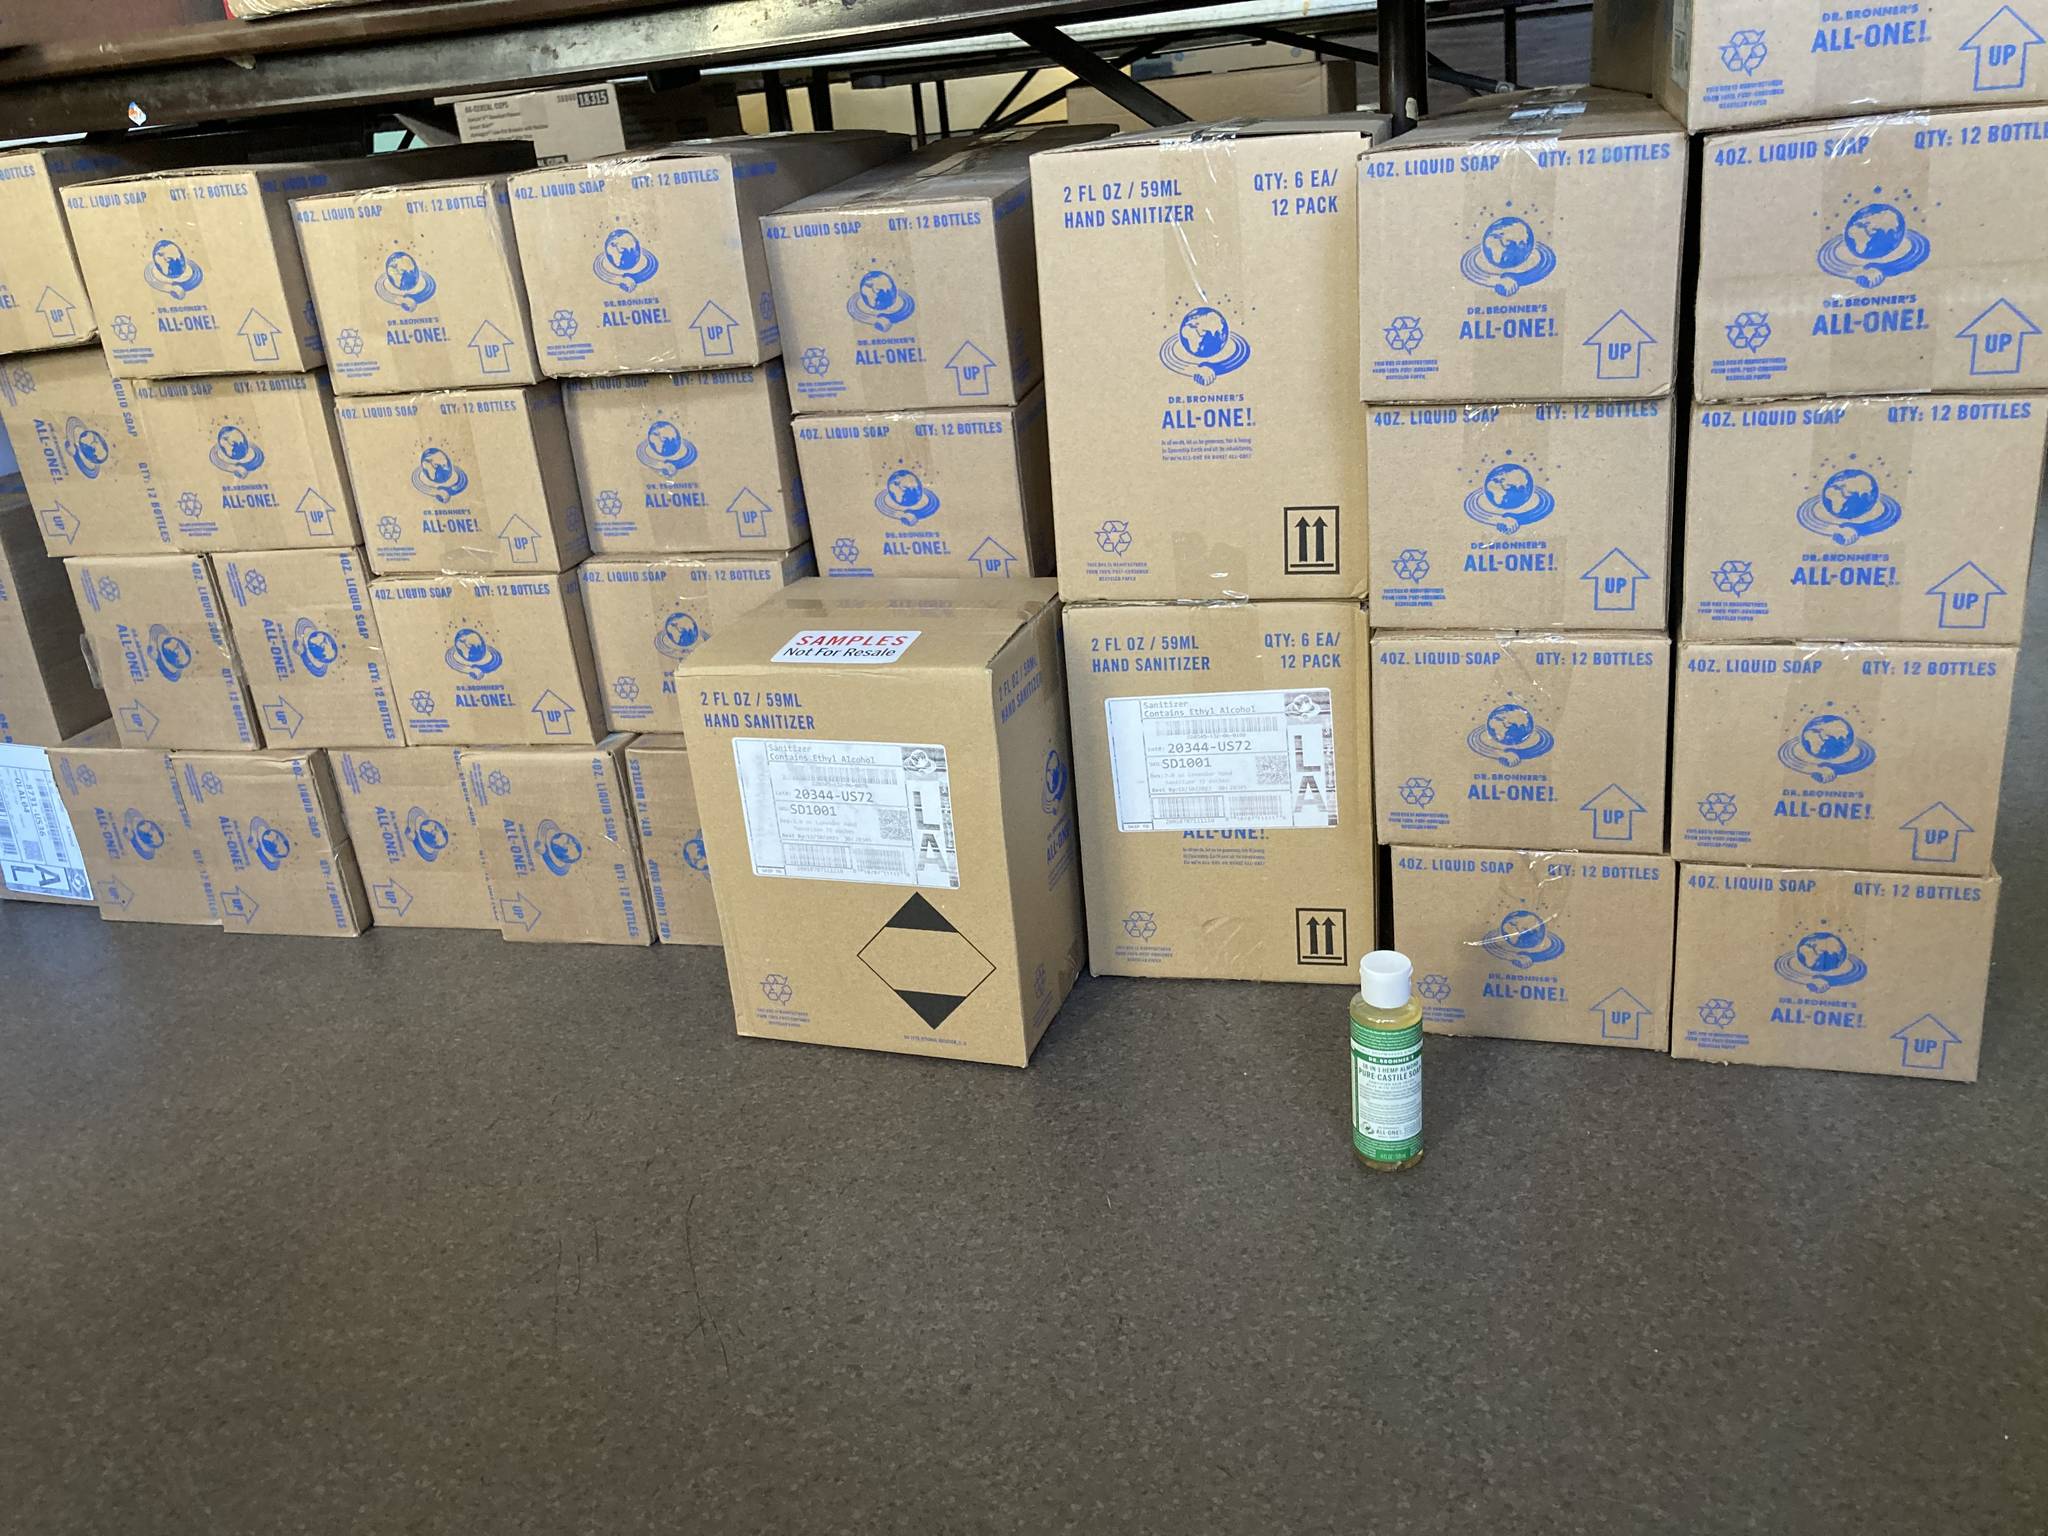 The Dr. Bronner’s company donated 2,000 bottles of soap to the Glory Hall last week, coming to more than 800 pounds of cleaning supplies. (Courtesy photo / Chloe Papier)